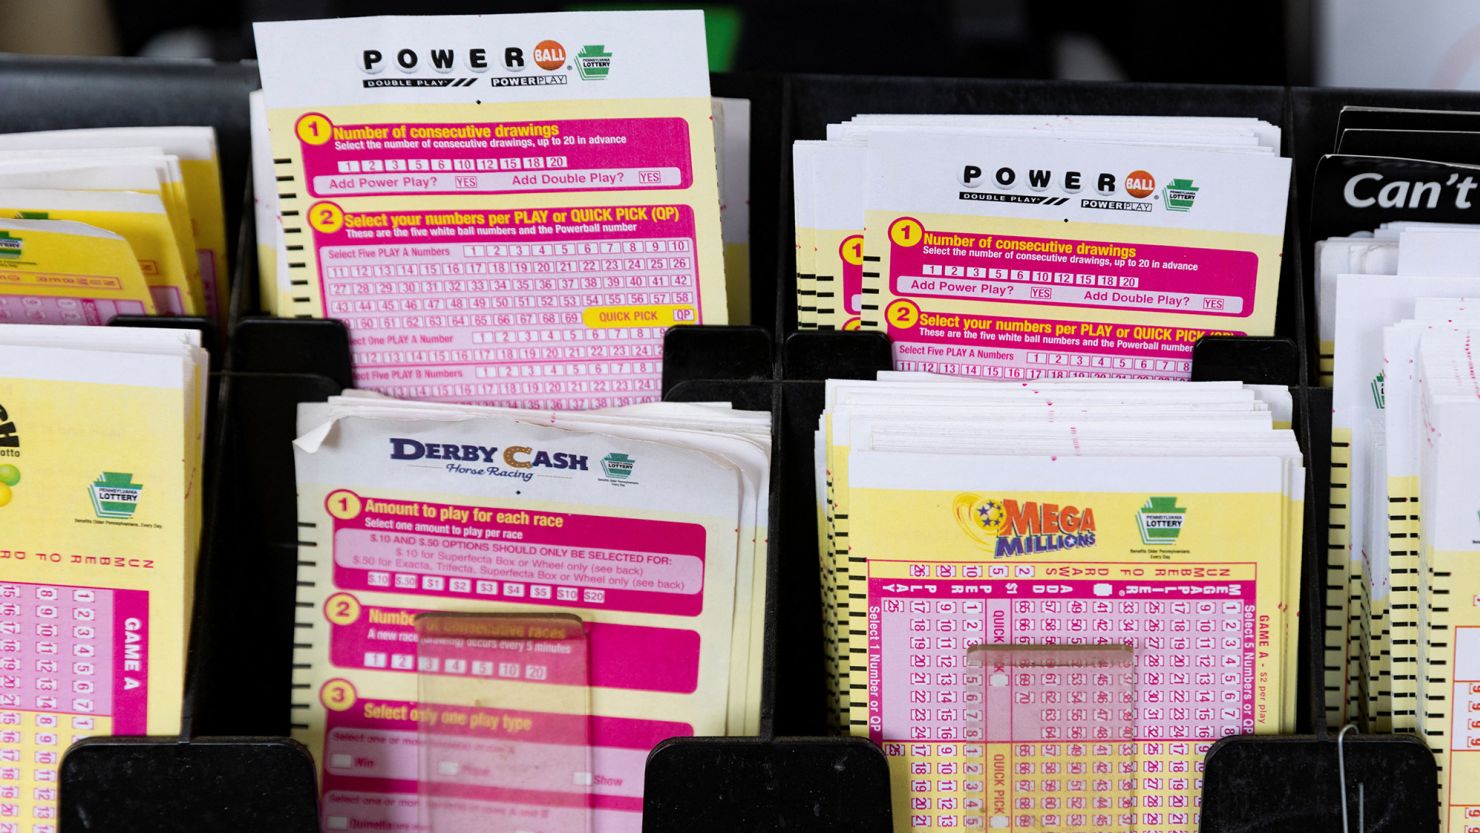 The Powerball jackpot climbed to an estimated $725 million after there was no big winner in Monday's drawing.